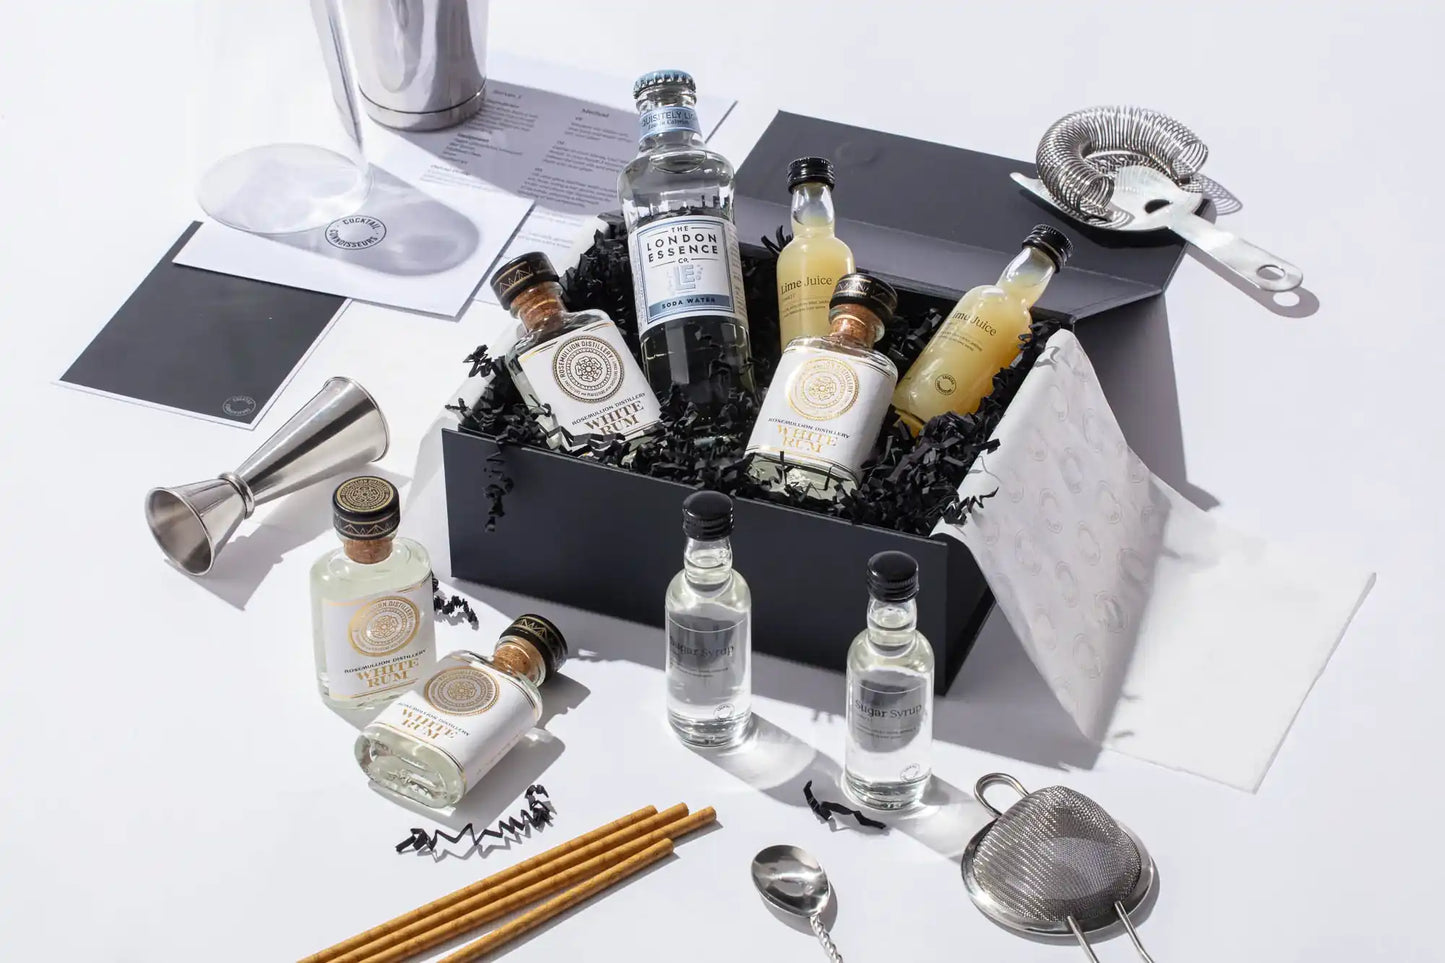 Mojito cocktail kit gift set with advanced bar equipment